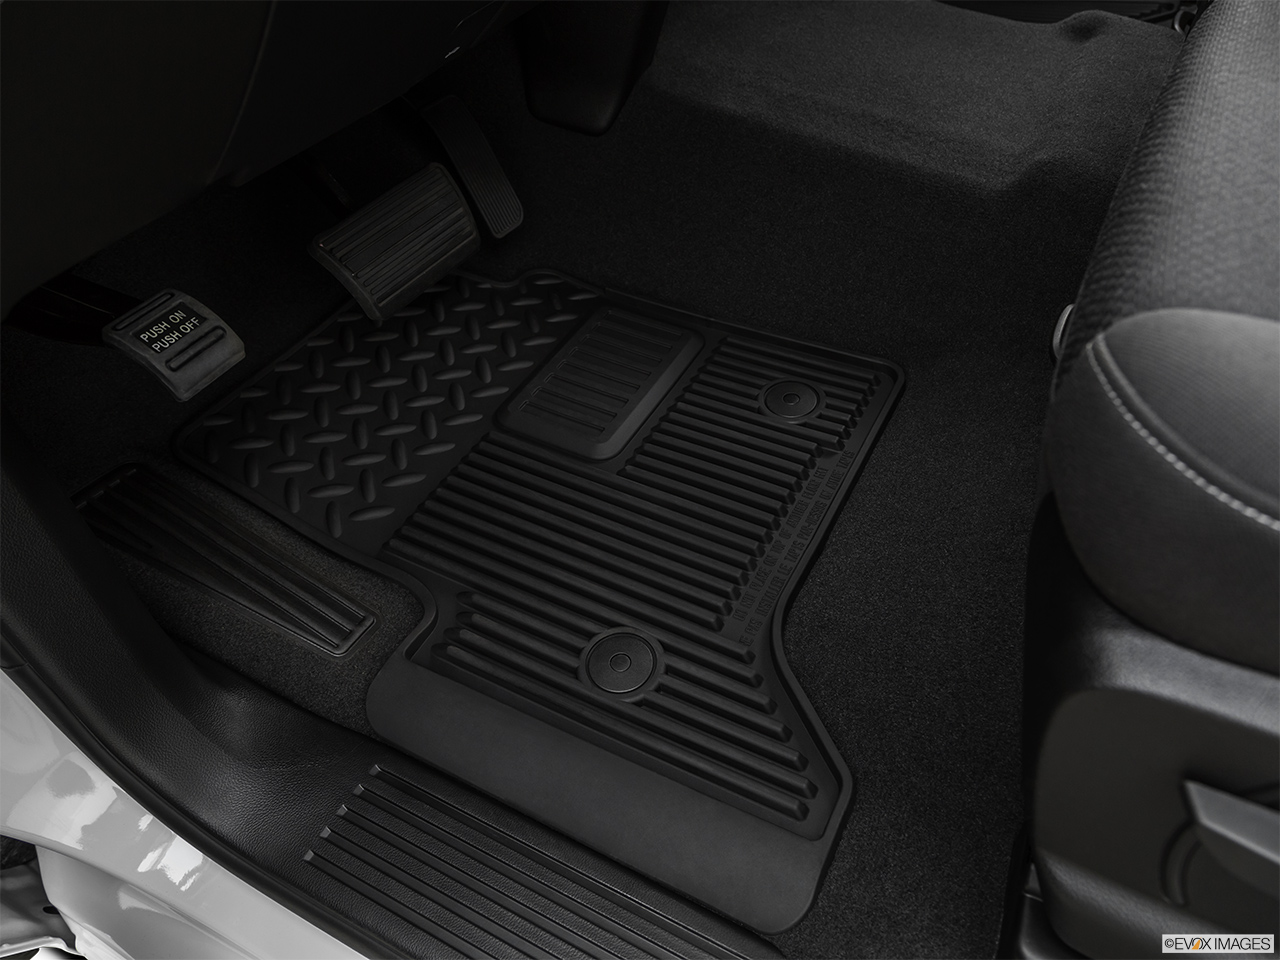 2019 GMC Sierra 2500HD SLE Driver's floor mat and pedals. Mid-seat level from outside looking in. 